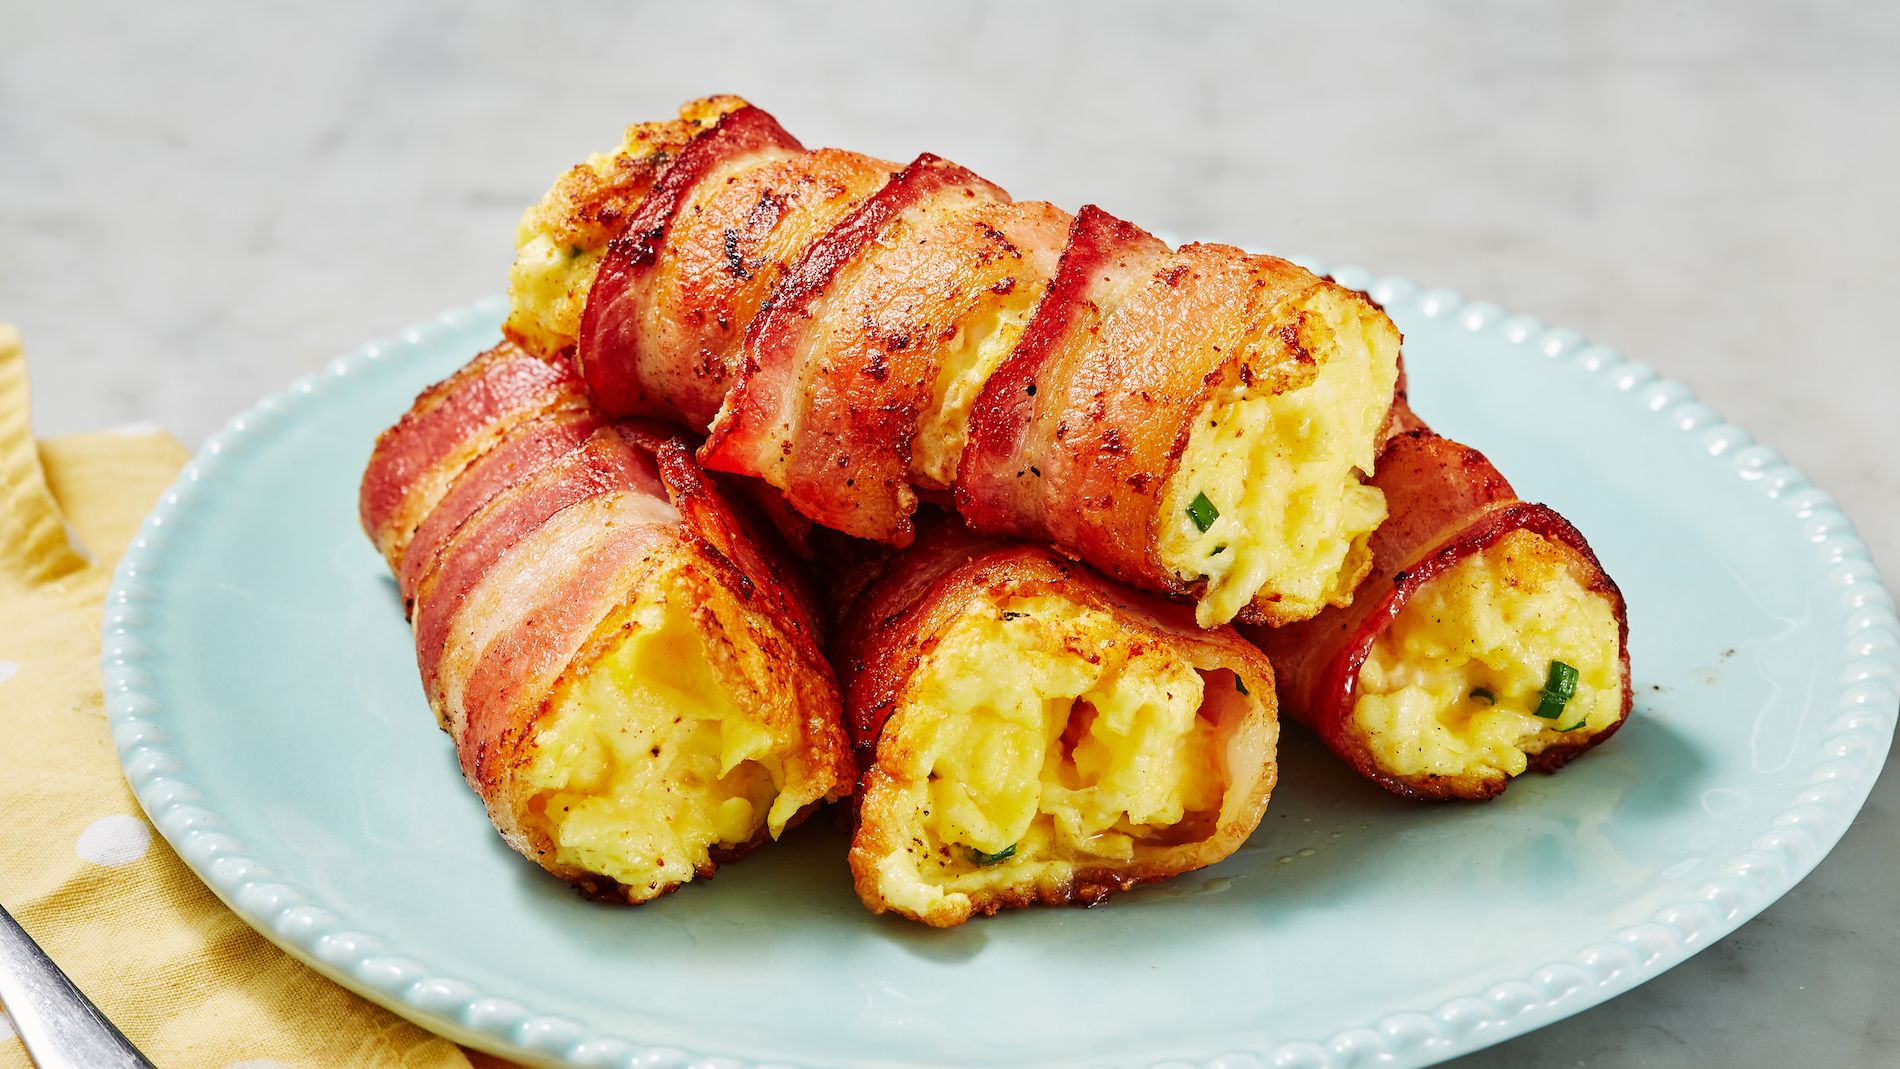 https://hips.hearstapps.com/hmg-prod/images/delish-190919-bacon-and-cheese-rollups-0078-landscape-pf-1571782990.jpg?crop=1xw:0.8441943127962085xh;center,top